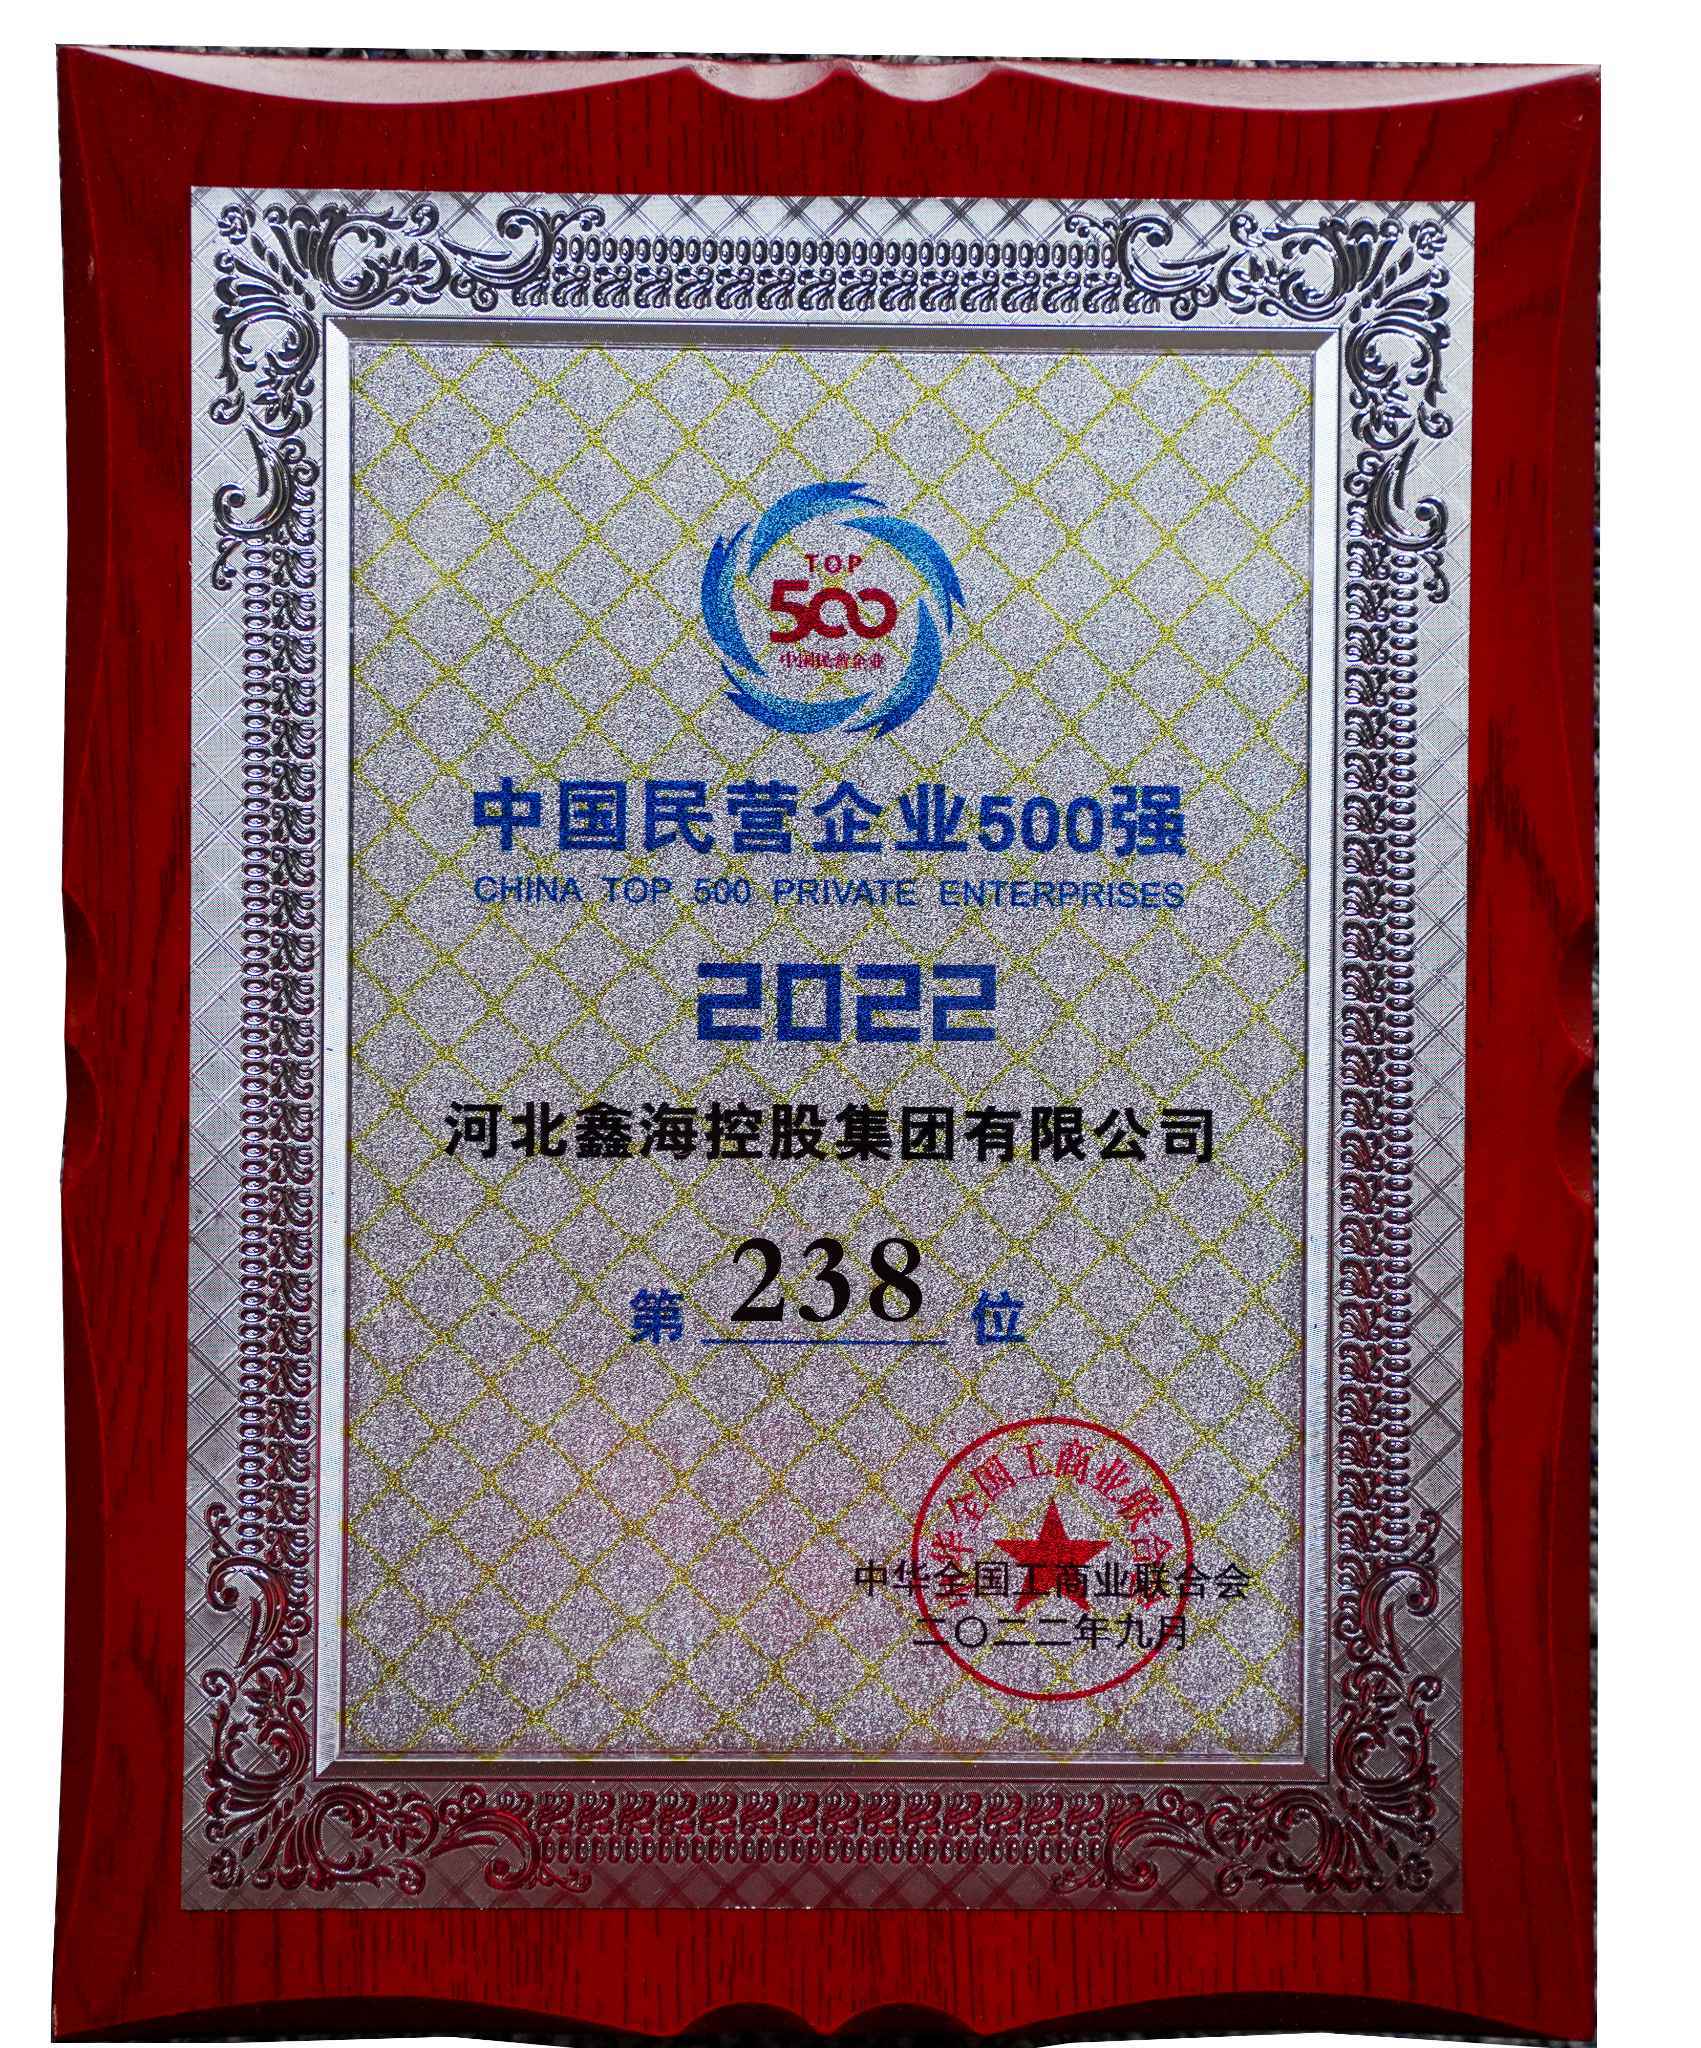 List of Top 500 Private Enterprises in China